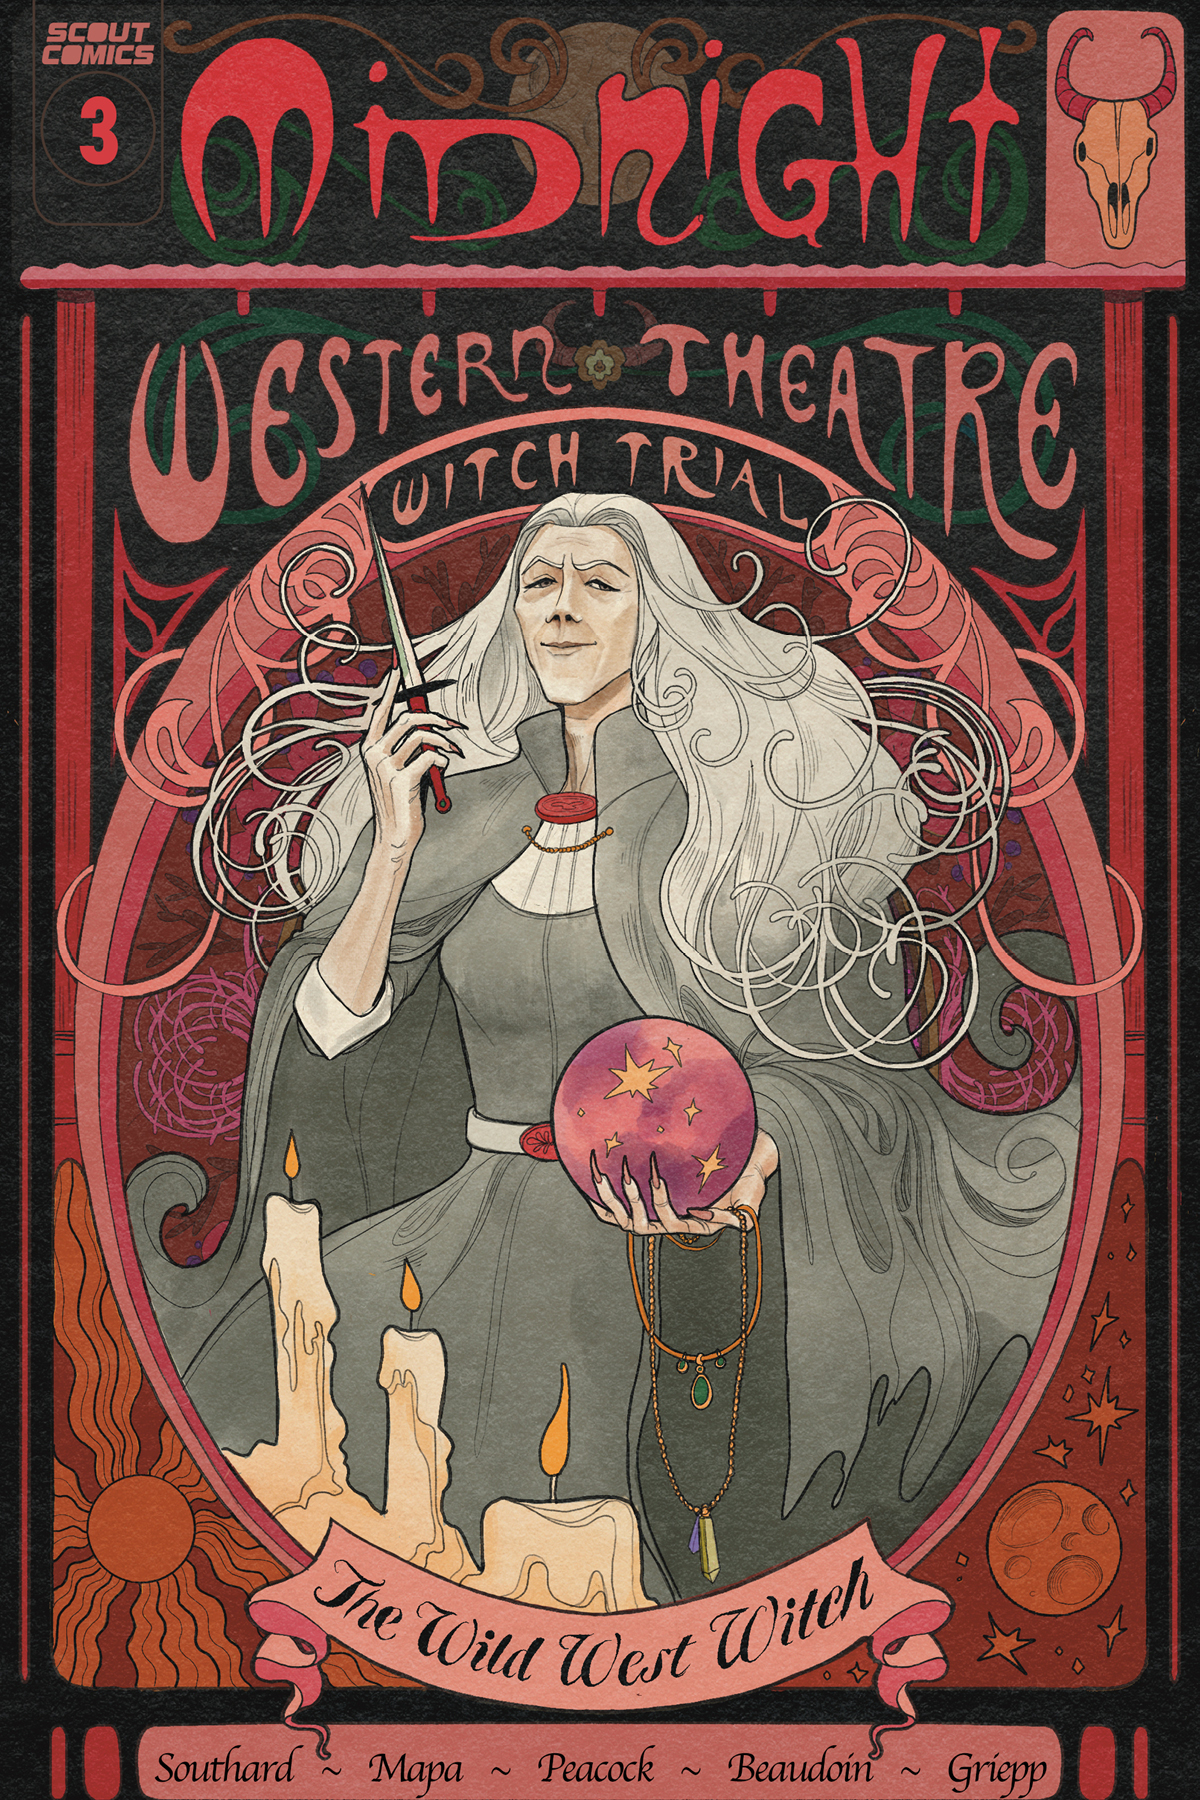 Midnight Western Theatre Witch Trial #3 (Mature) (Of 5)